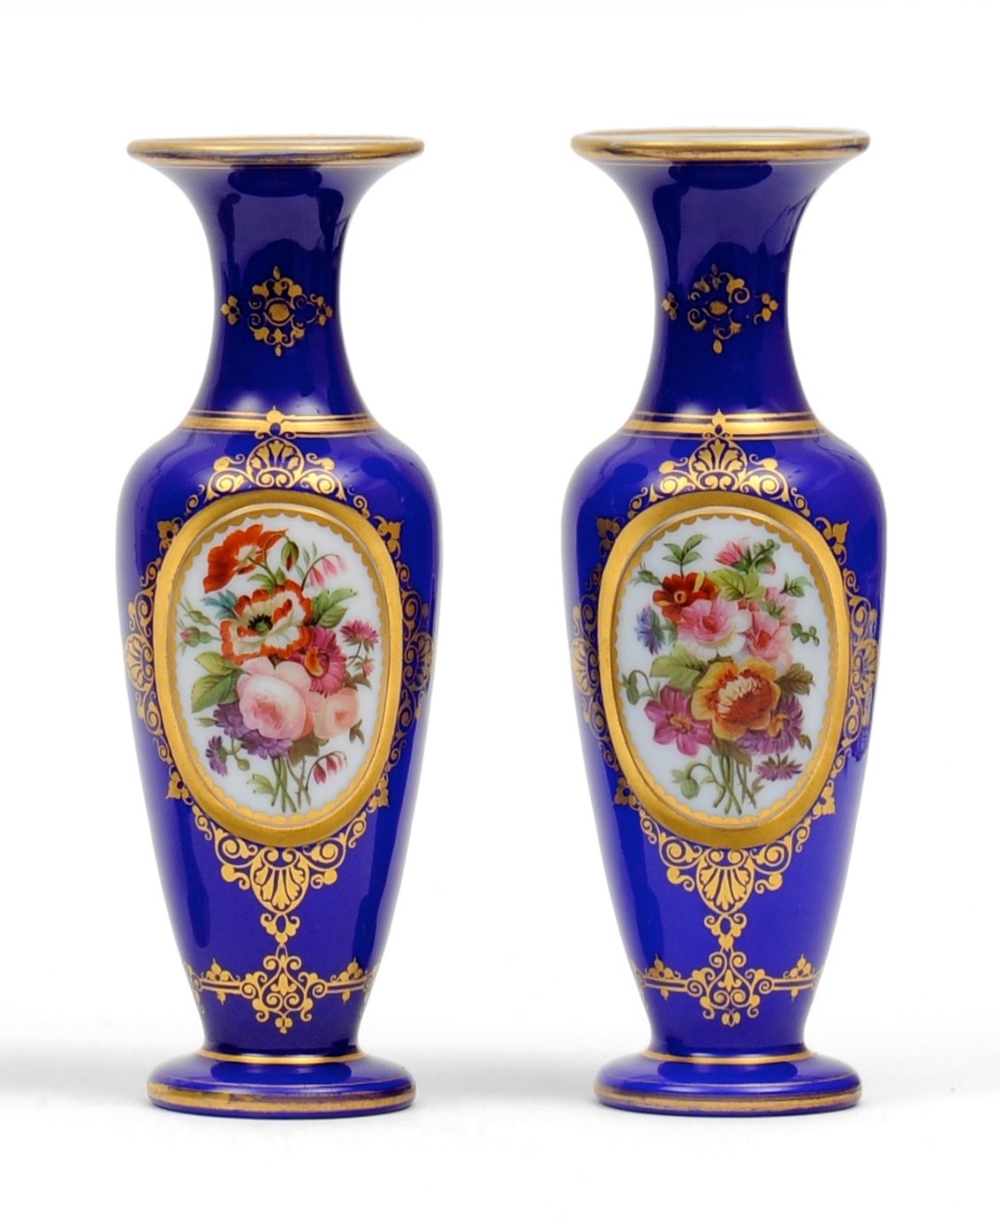 A Pair of Baccarat Blue Overlay White Glass Vases, mid 19th century, of baluster form, painted with